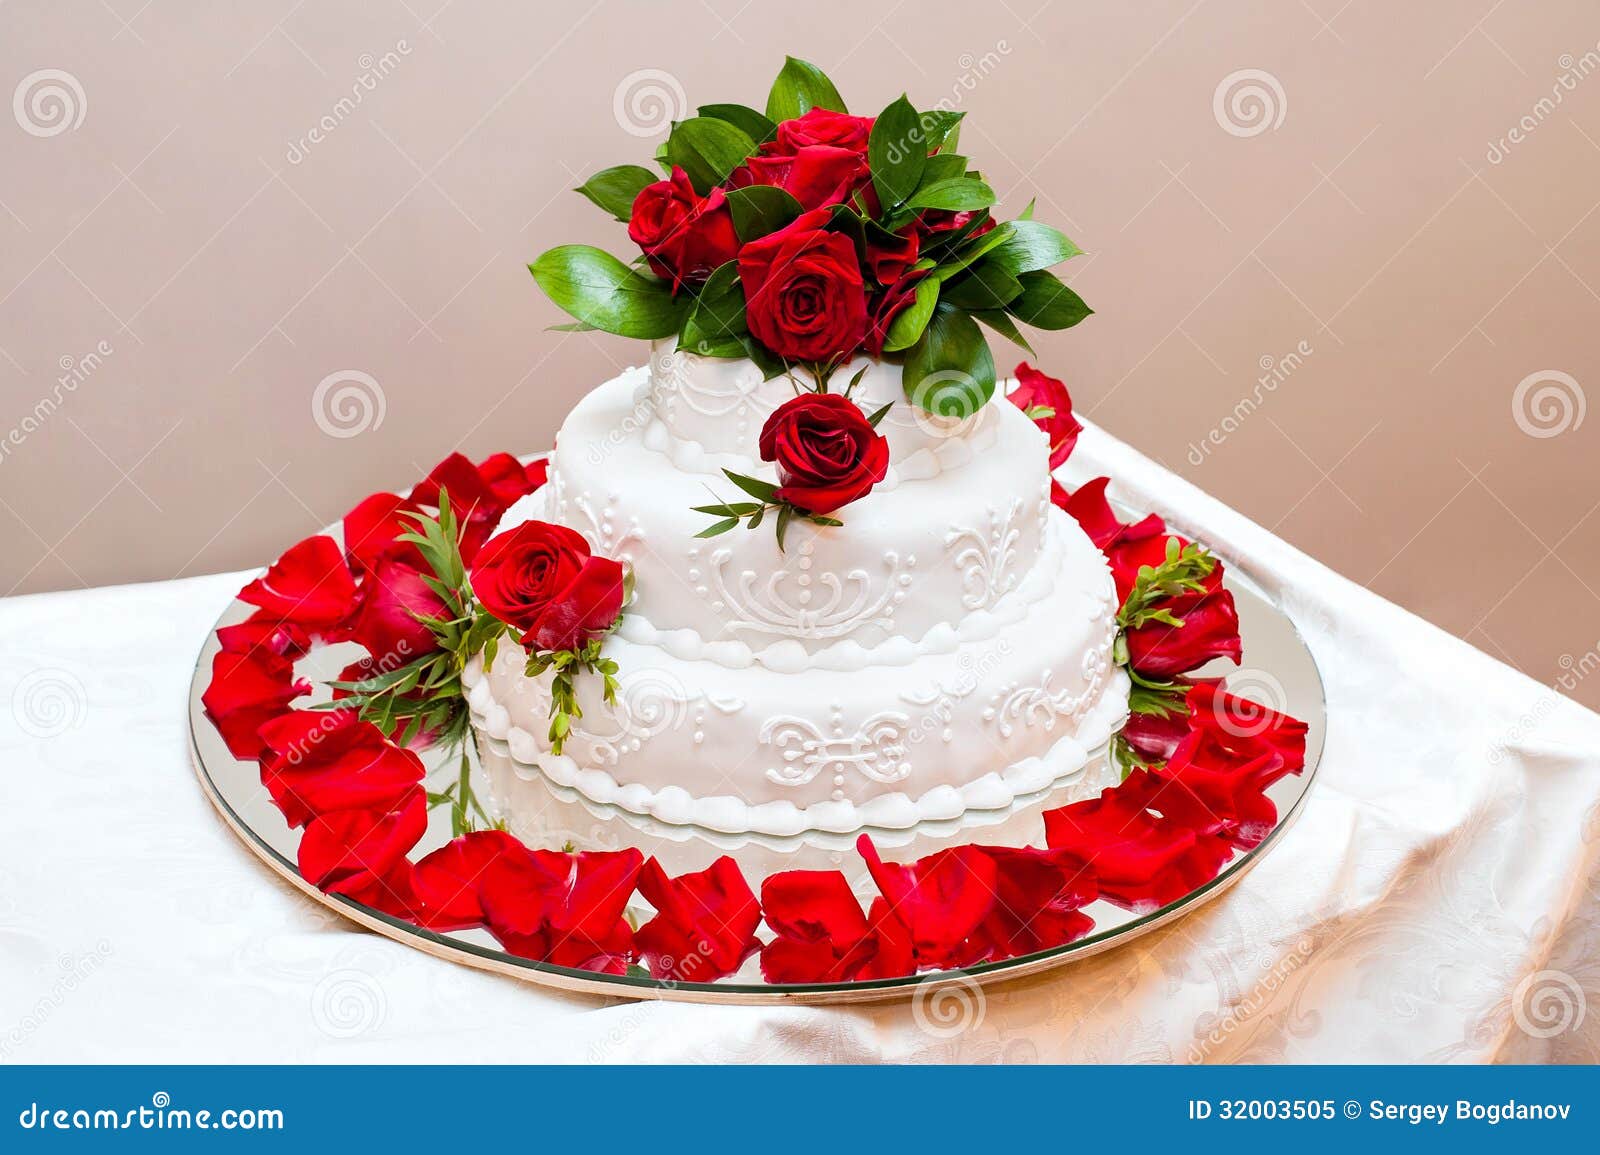 Wedding Cake with Red Roses Stock Image - Image of confectionery ...